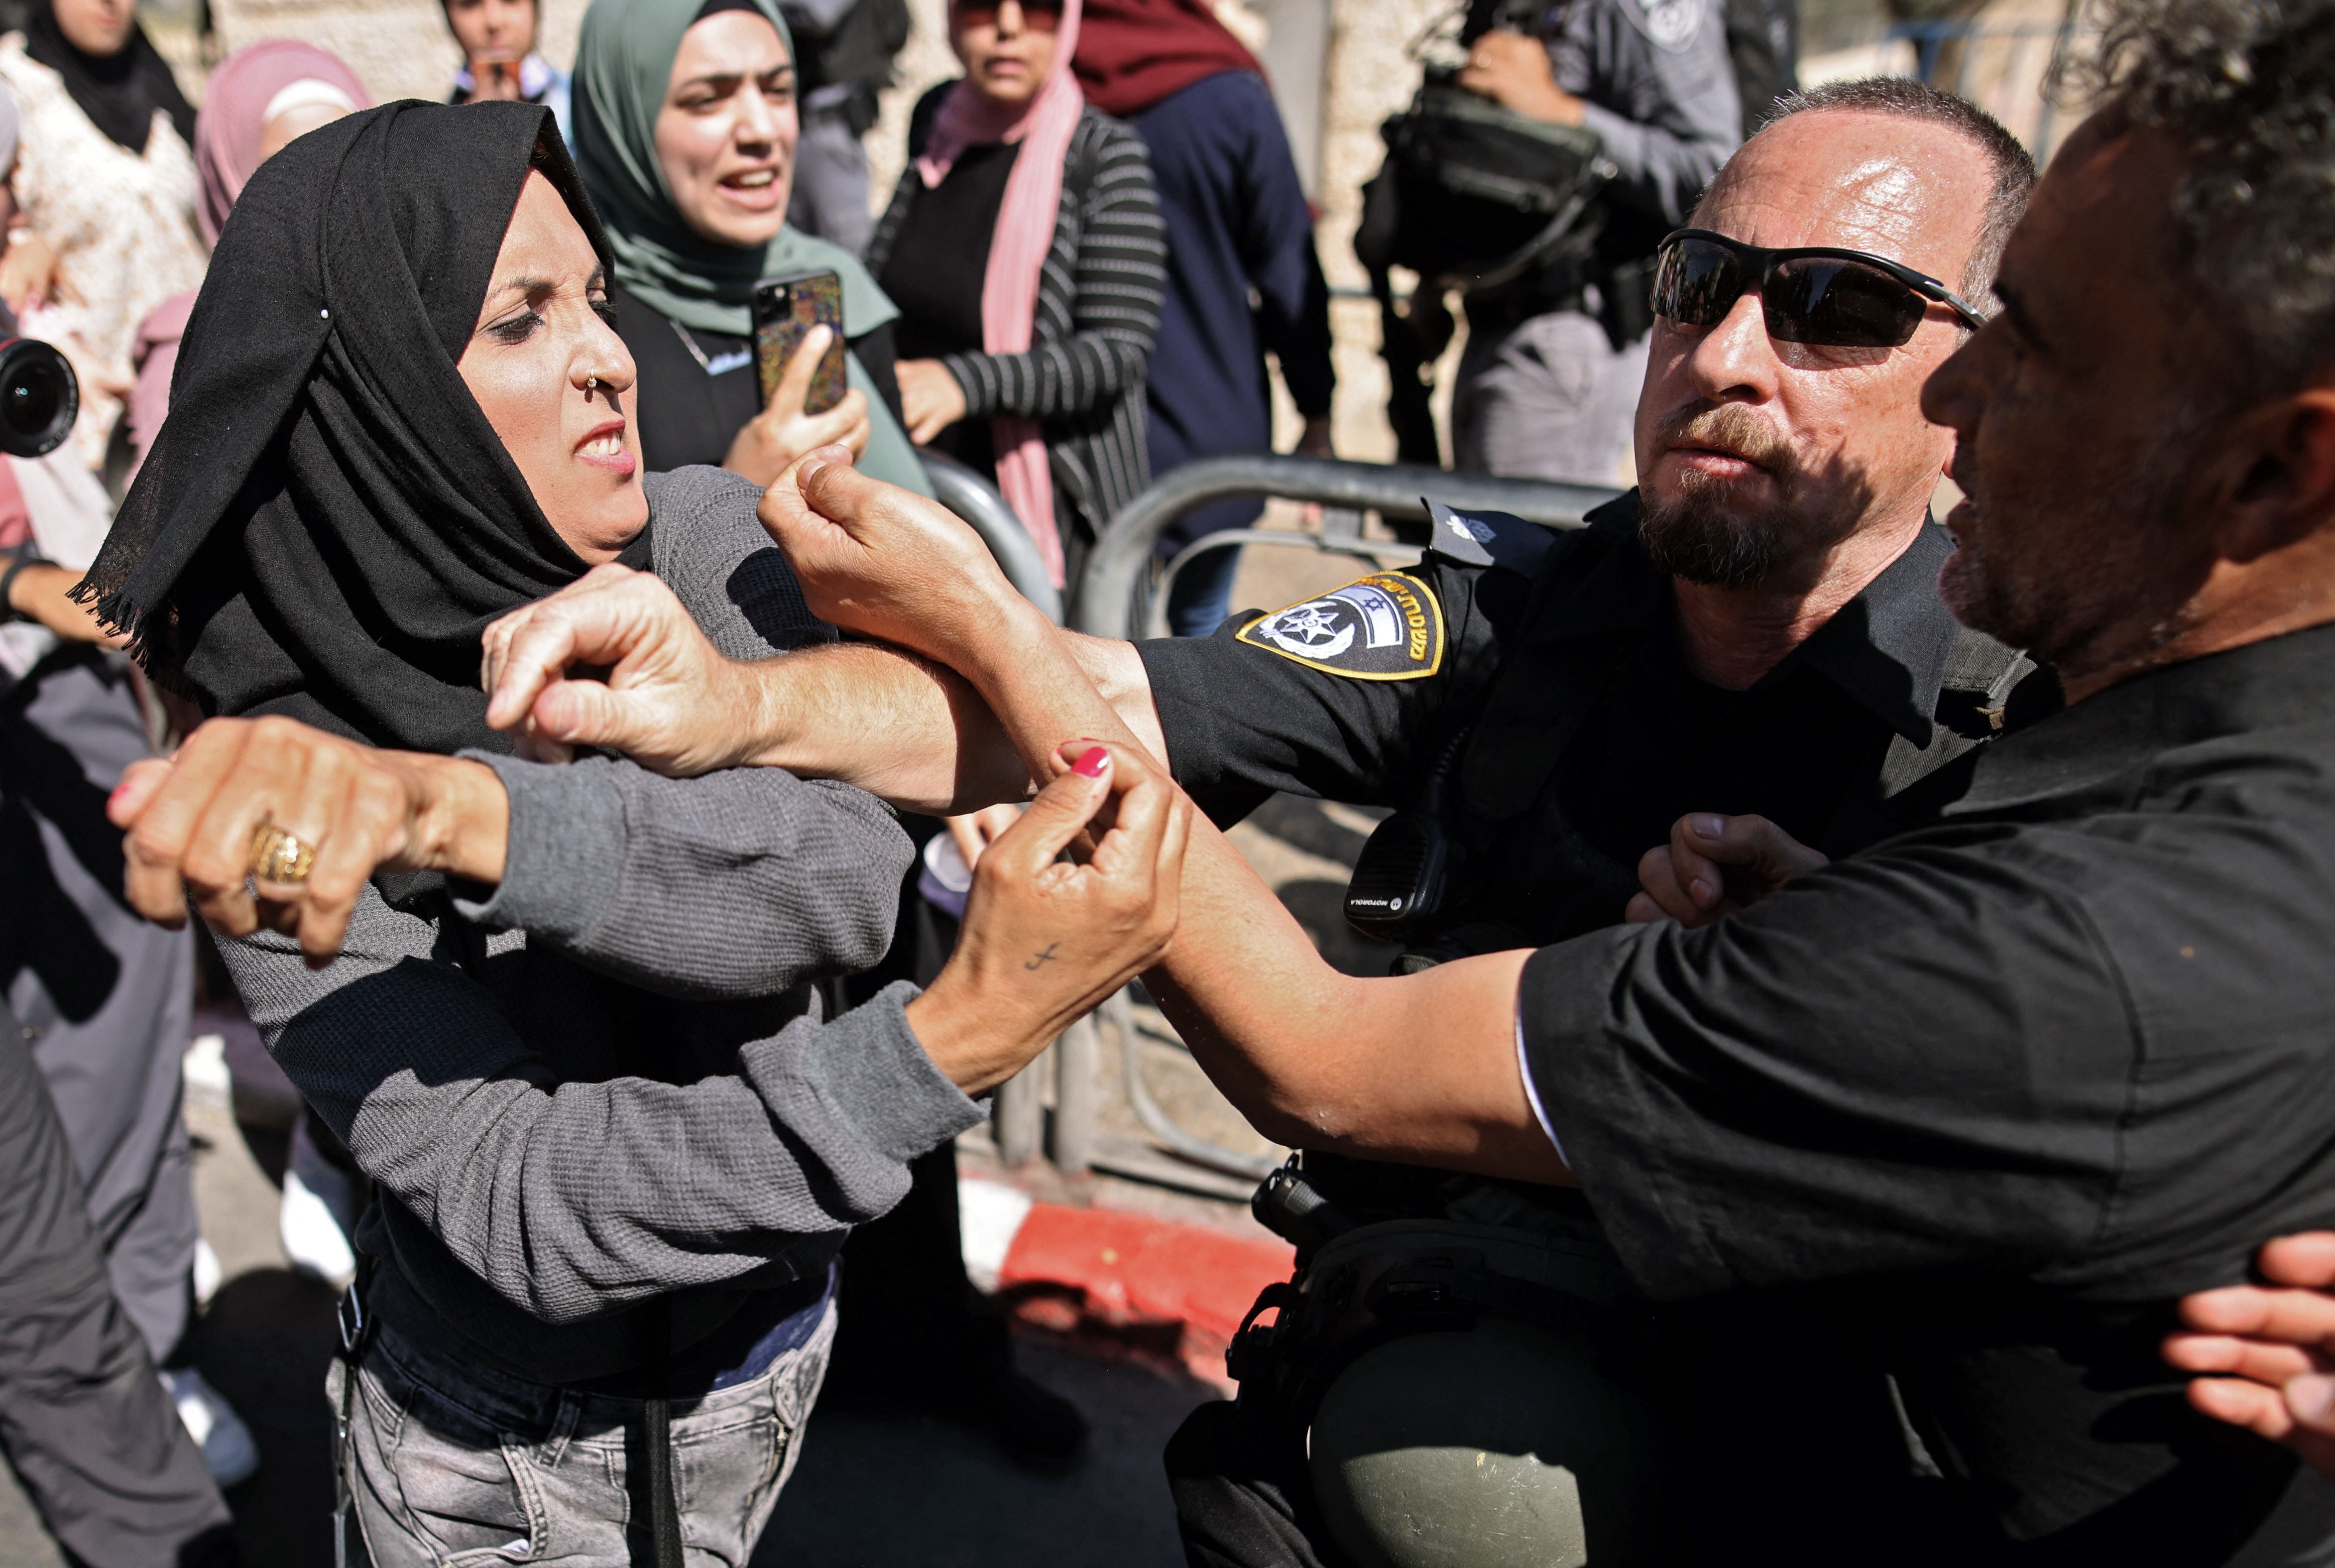 A Palestinian woman confronts Israeli security forces outside the Damascus gate in east Jerusalem